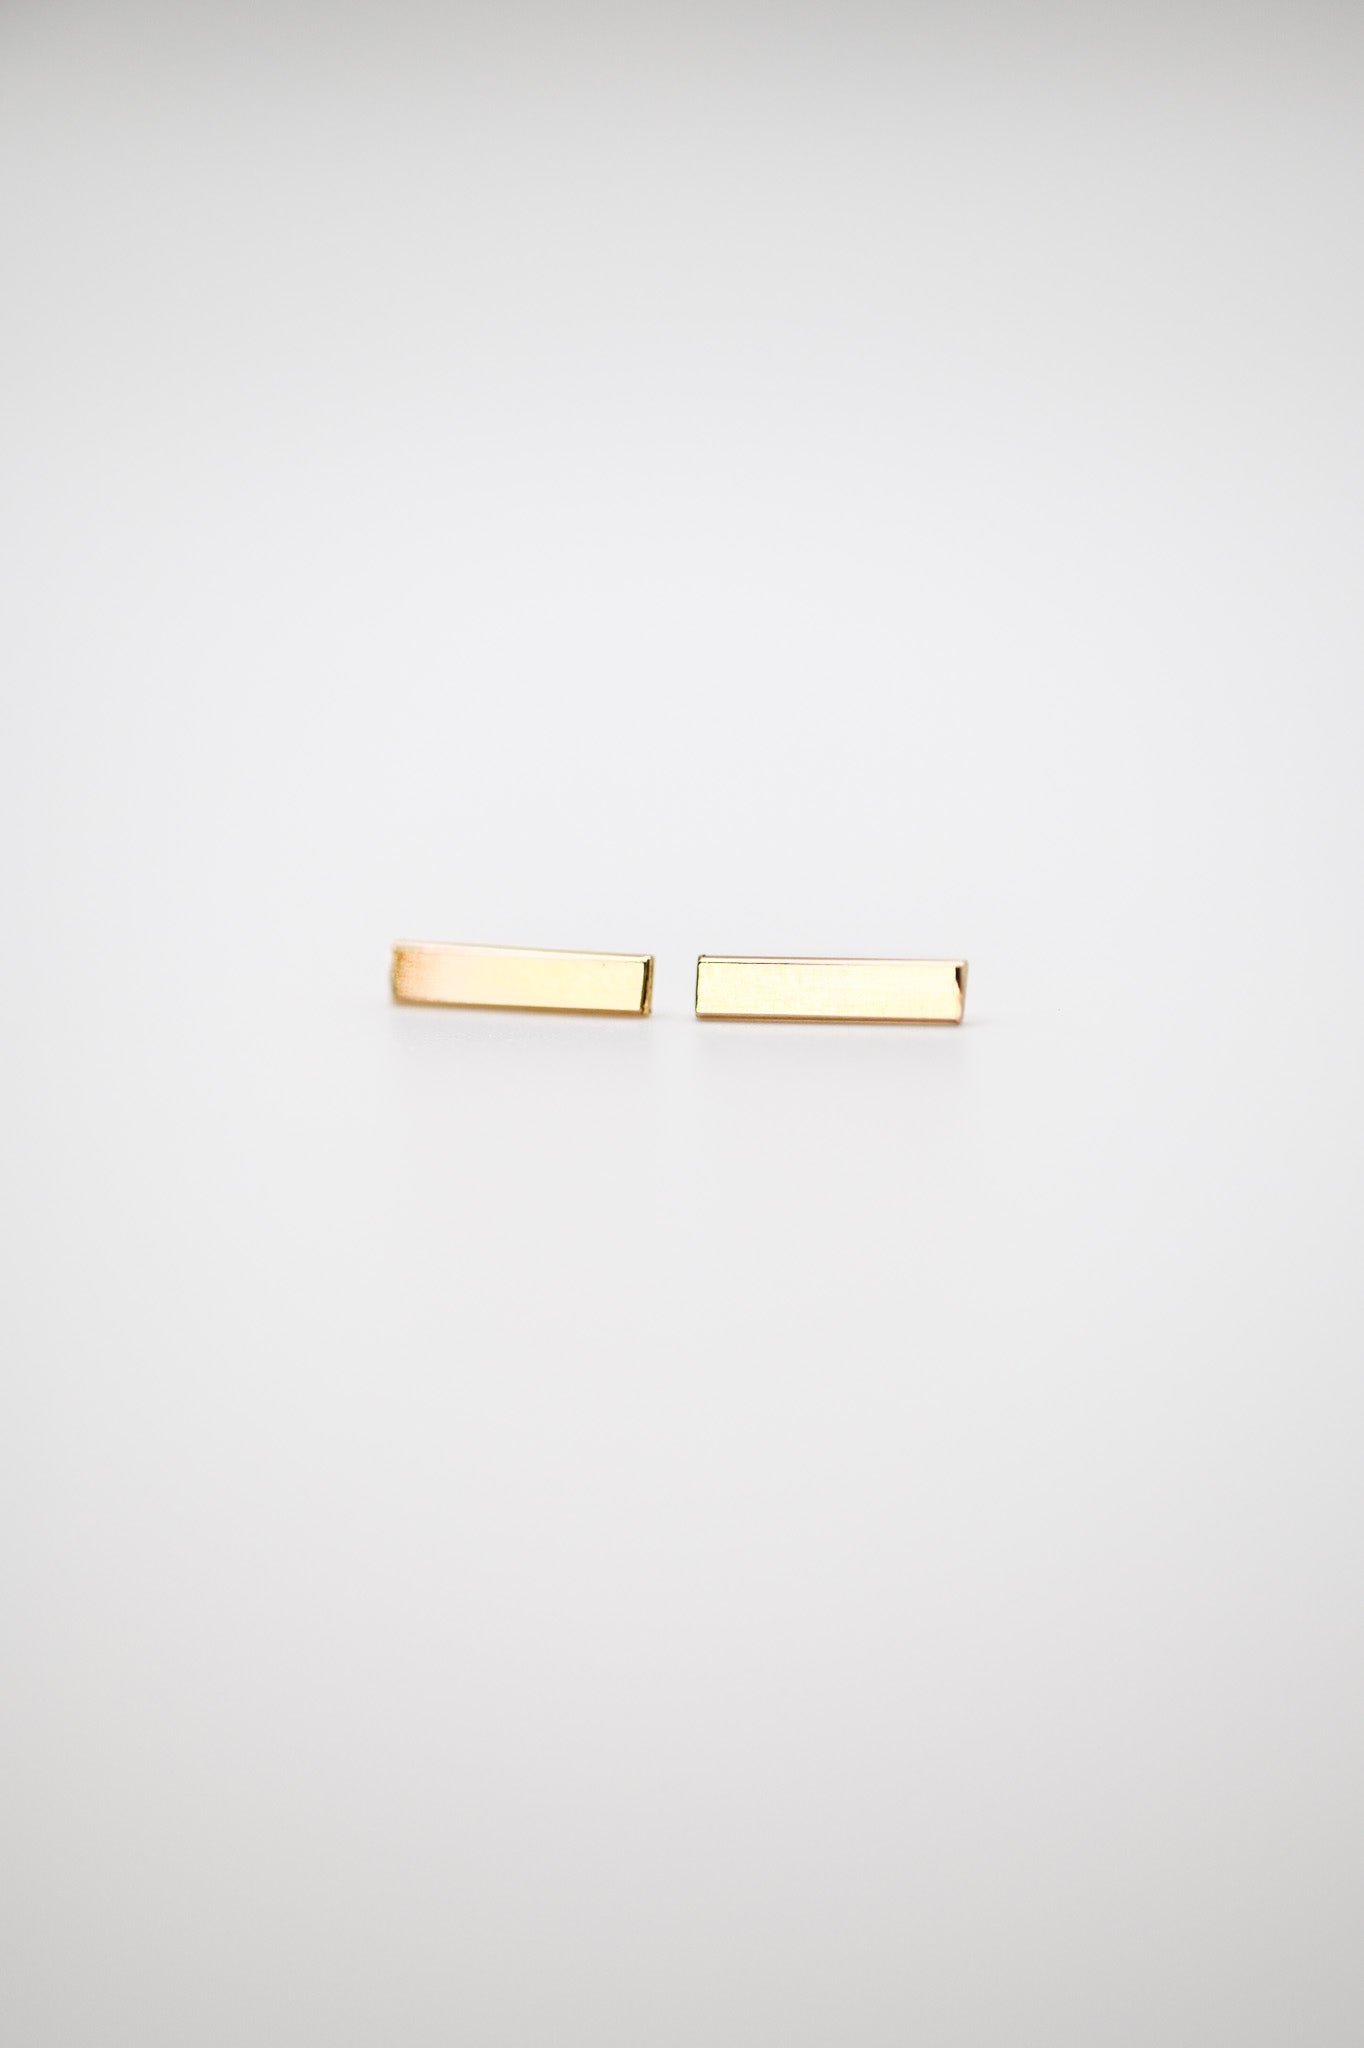 Mirror Flat Back Stud Earring, Solid Gold or Rose Gold